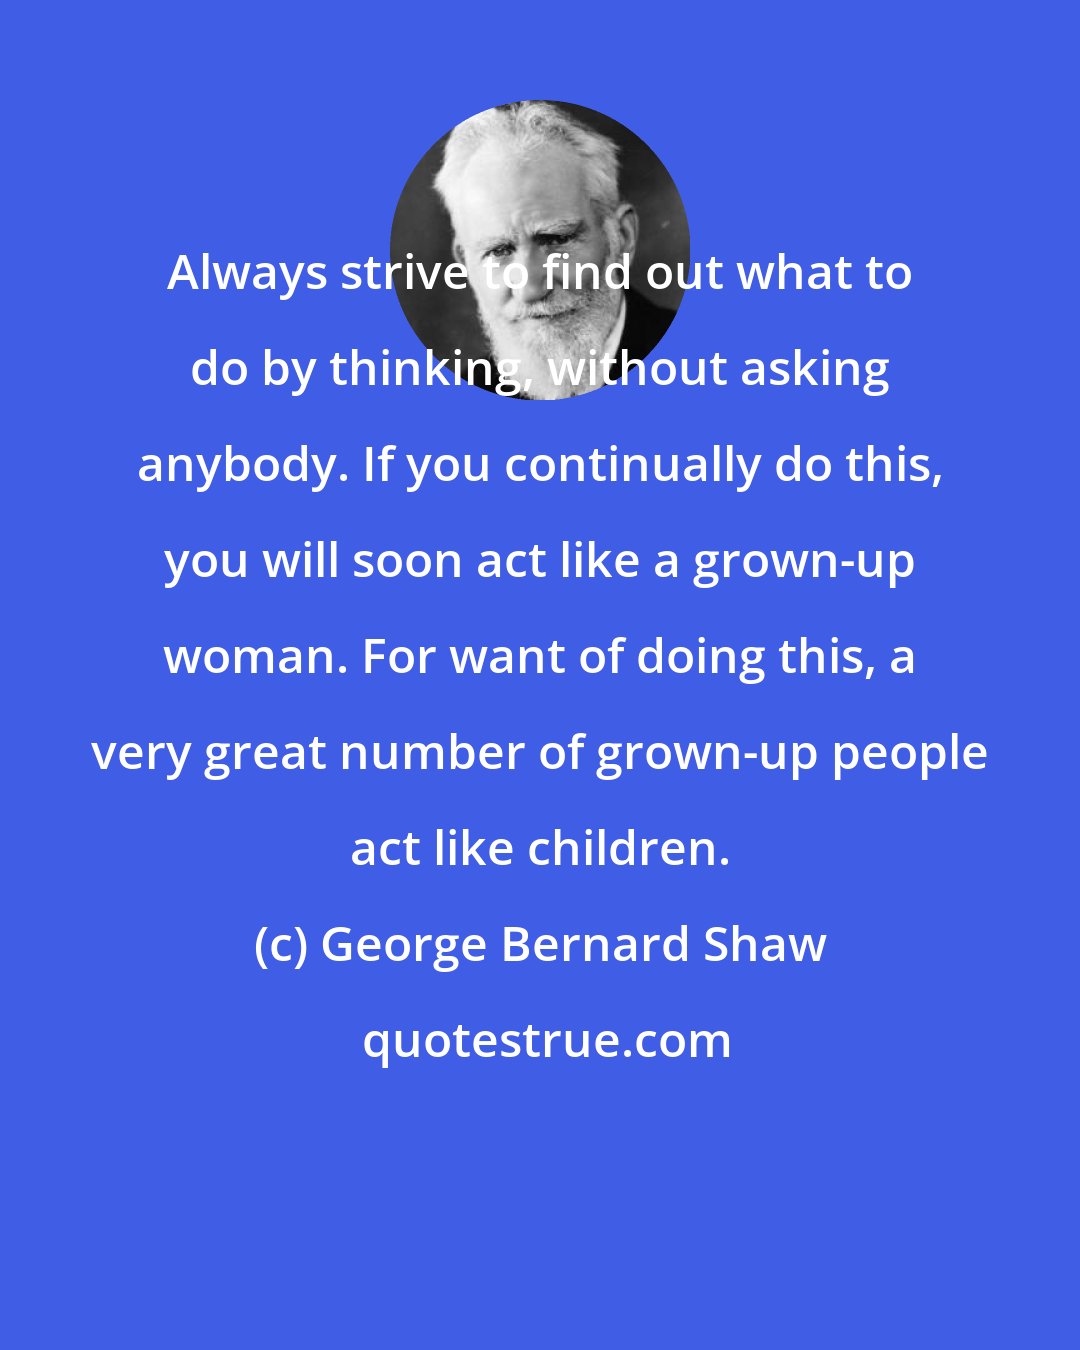 George Bernard Shaw: Always strive to find out what to do by thinking, without asking anybody. If you continually do this, you will soon act like a grown-up woman. For want of doing this, a very great number of grown-up people act like children.